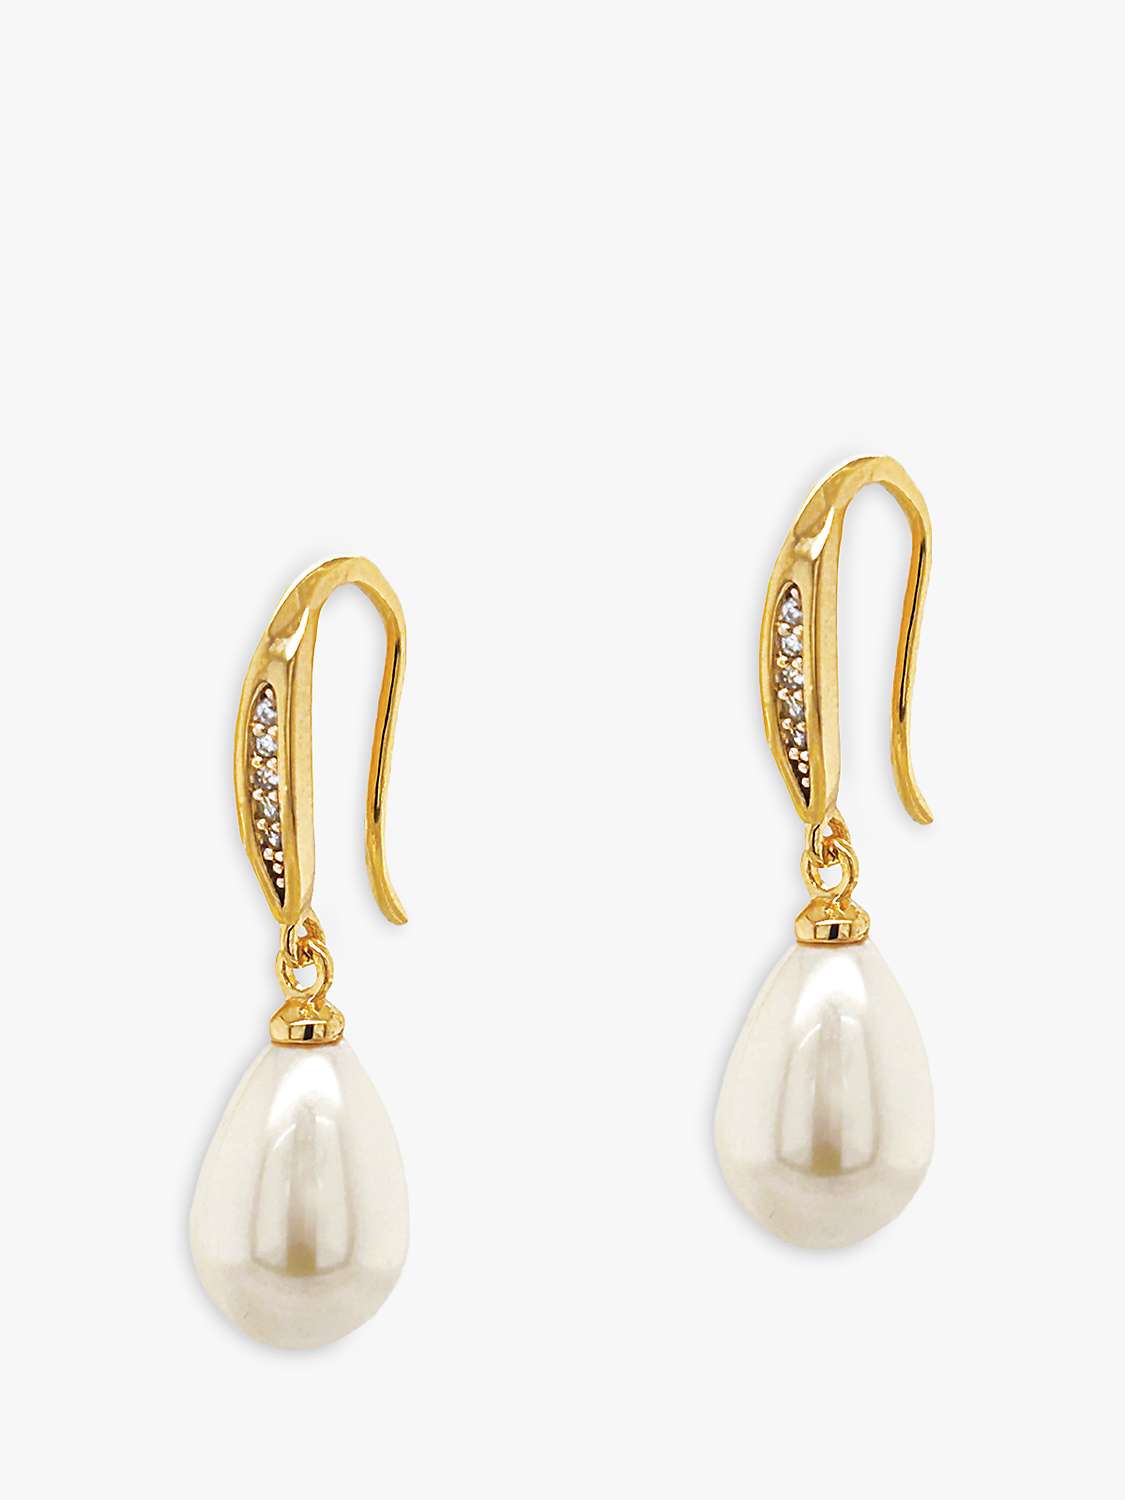 Buy Ivory & Co. Faux Pearl and Crystal Hook Drop Earrings, Gold Online at johnlewis.com